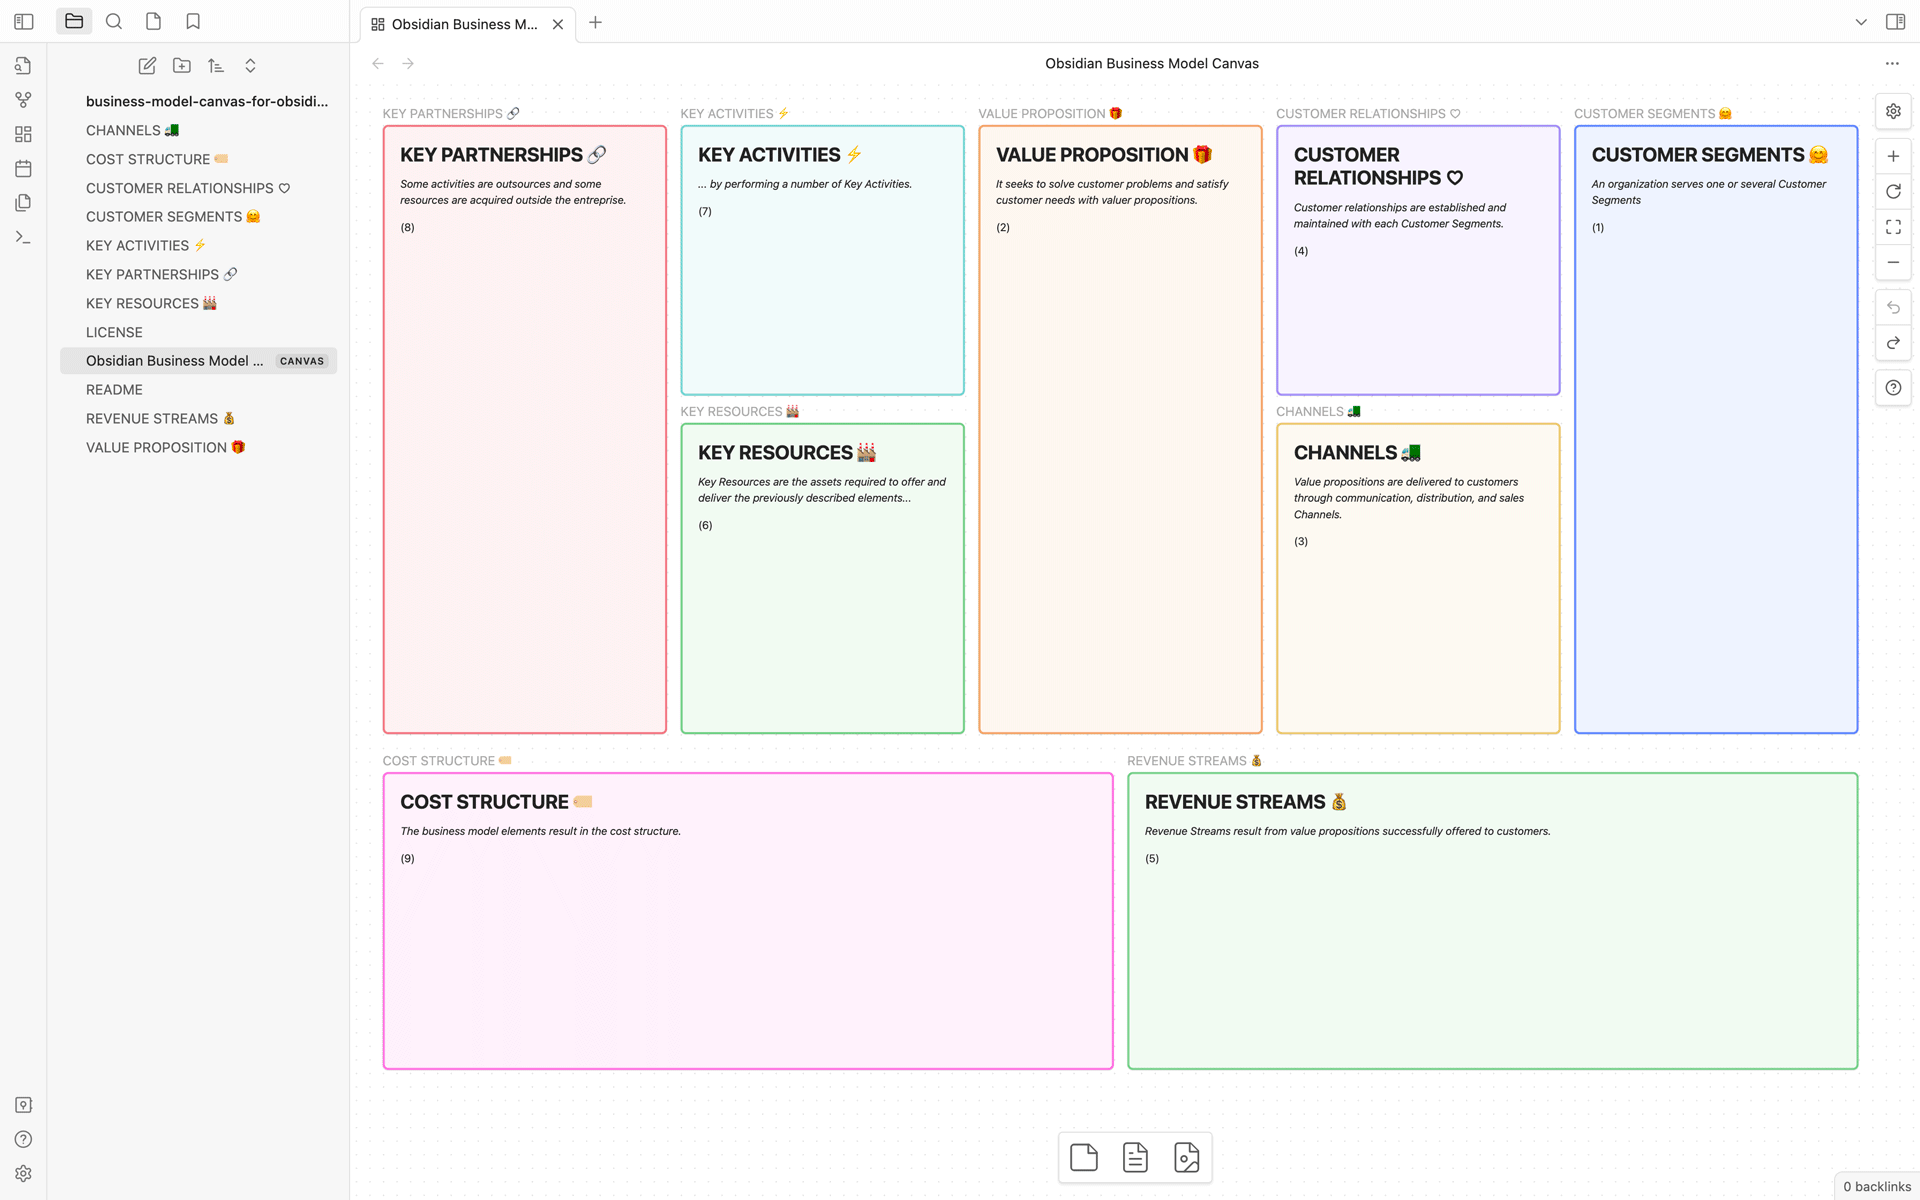 Business Model Canvas template for Obsidian and Obsidian Kanban